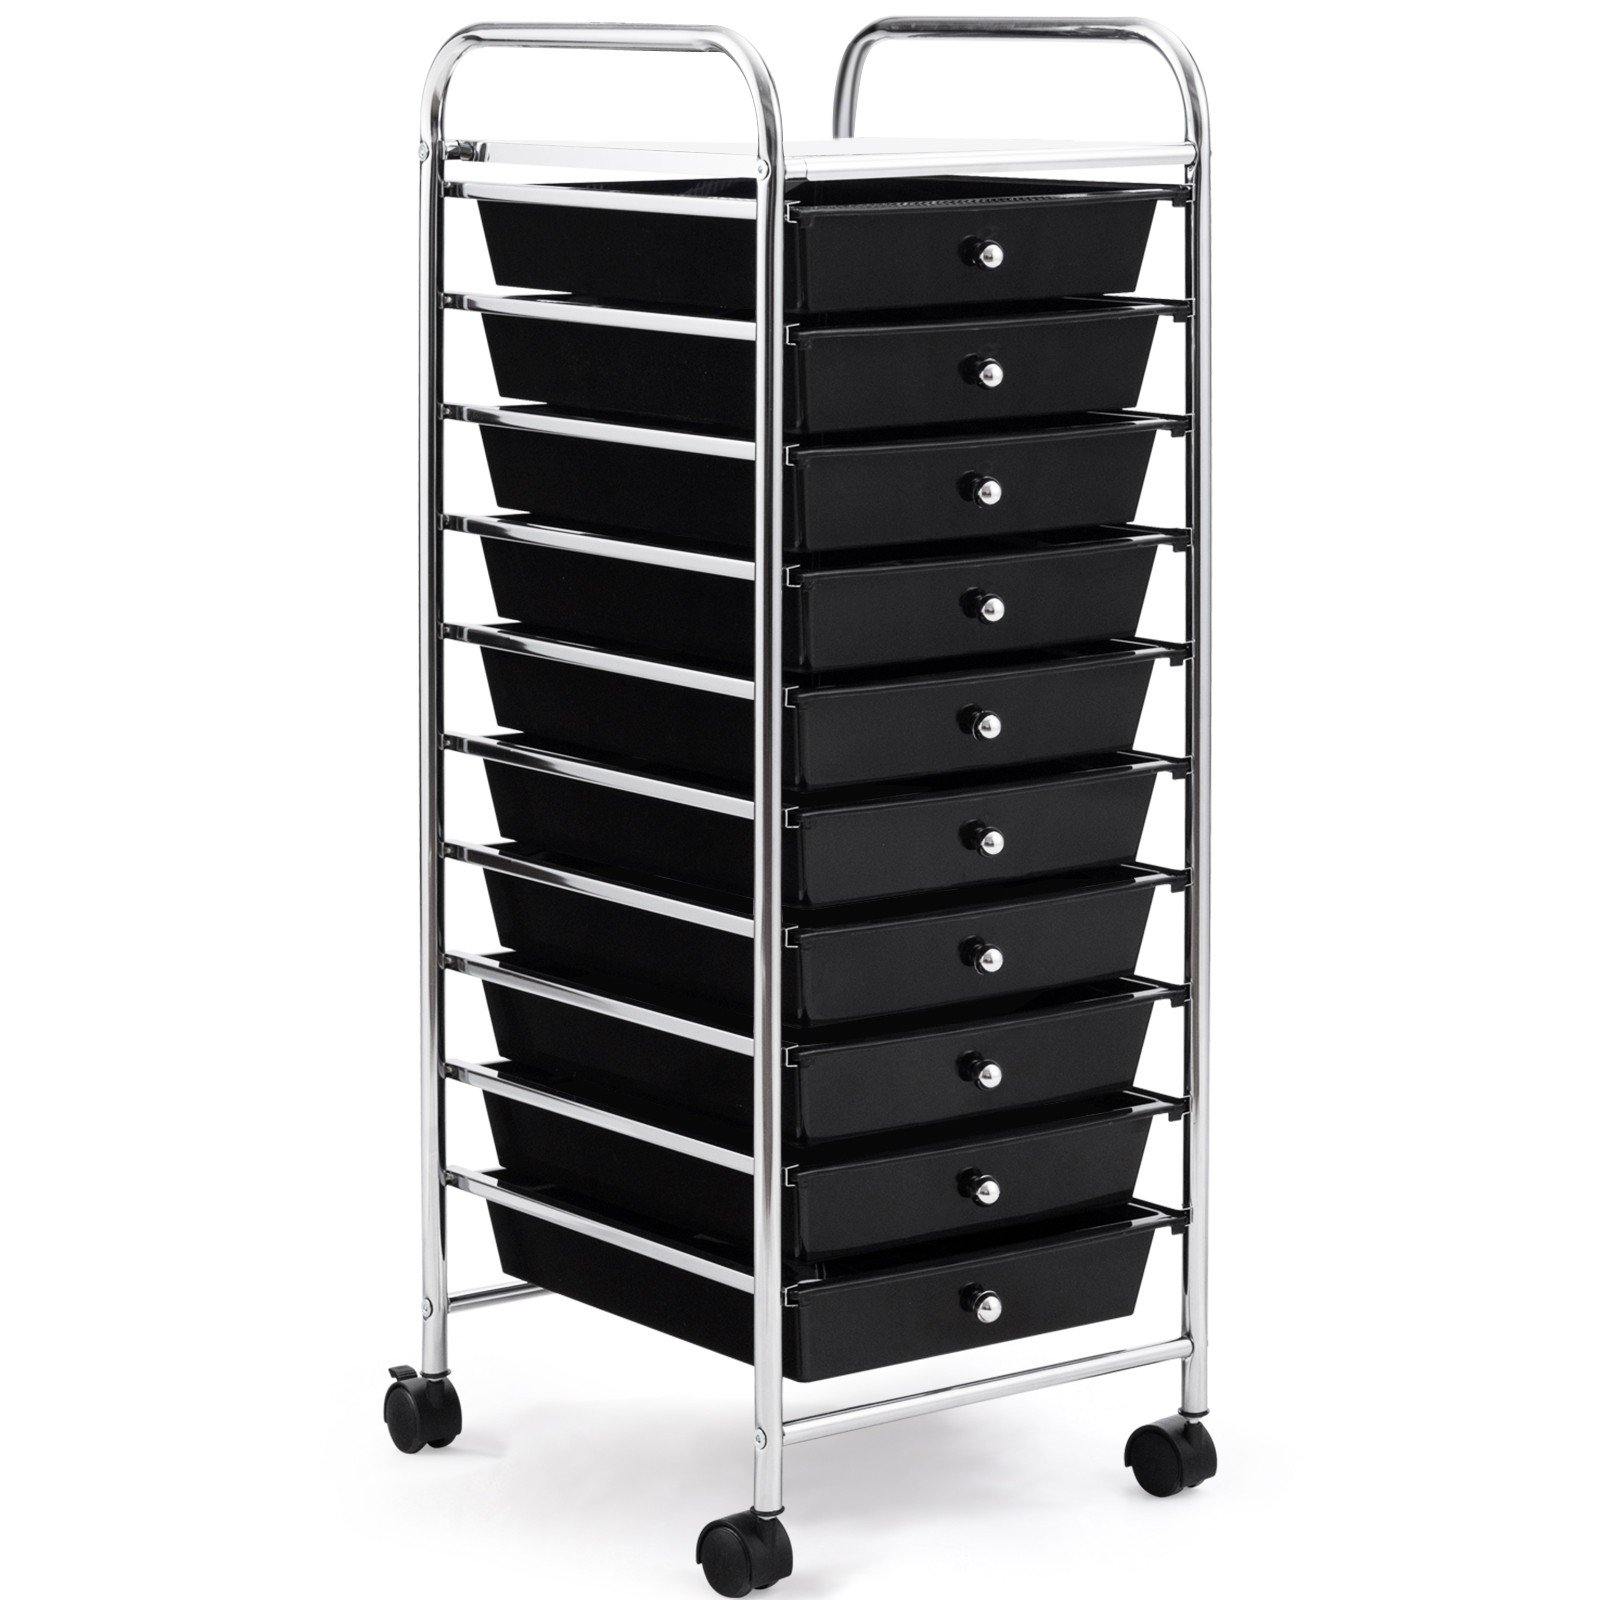 Giantex Rolling Storage Cart on Wheels with 10 Drawers, Black